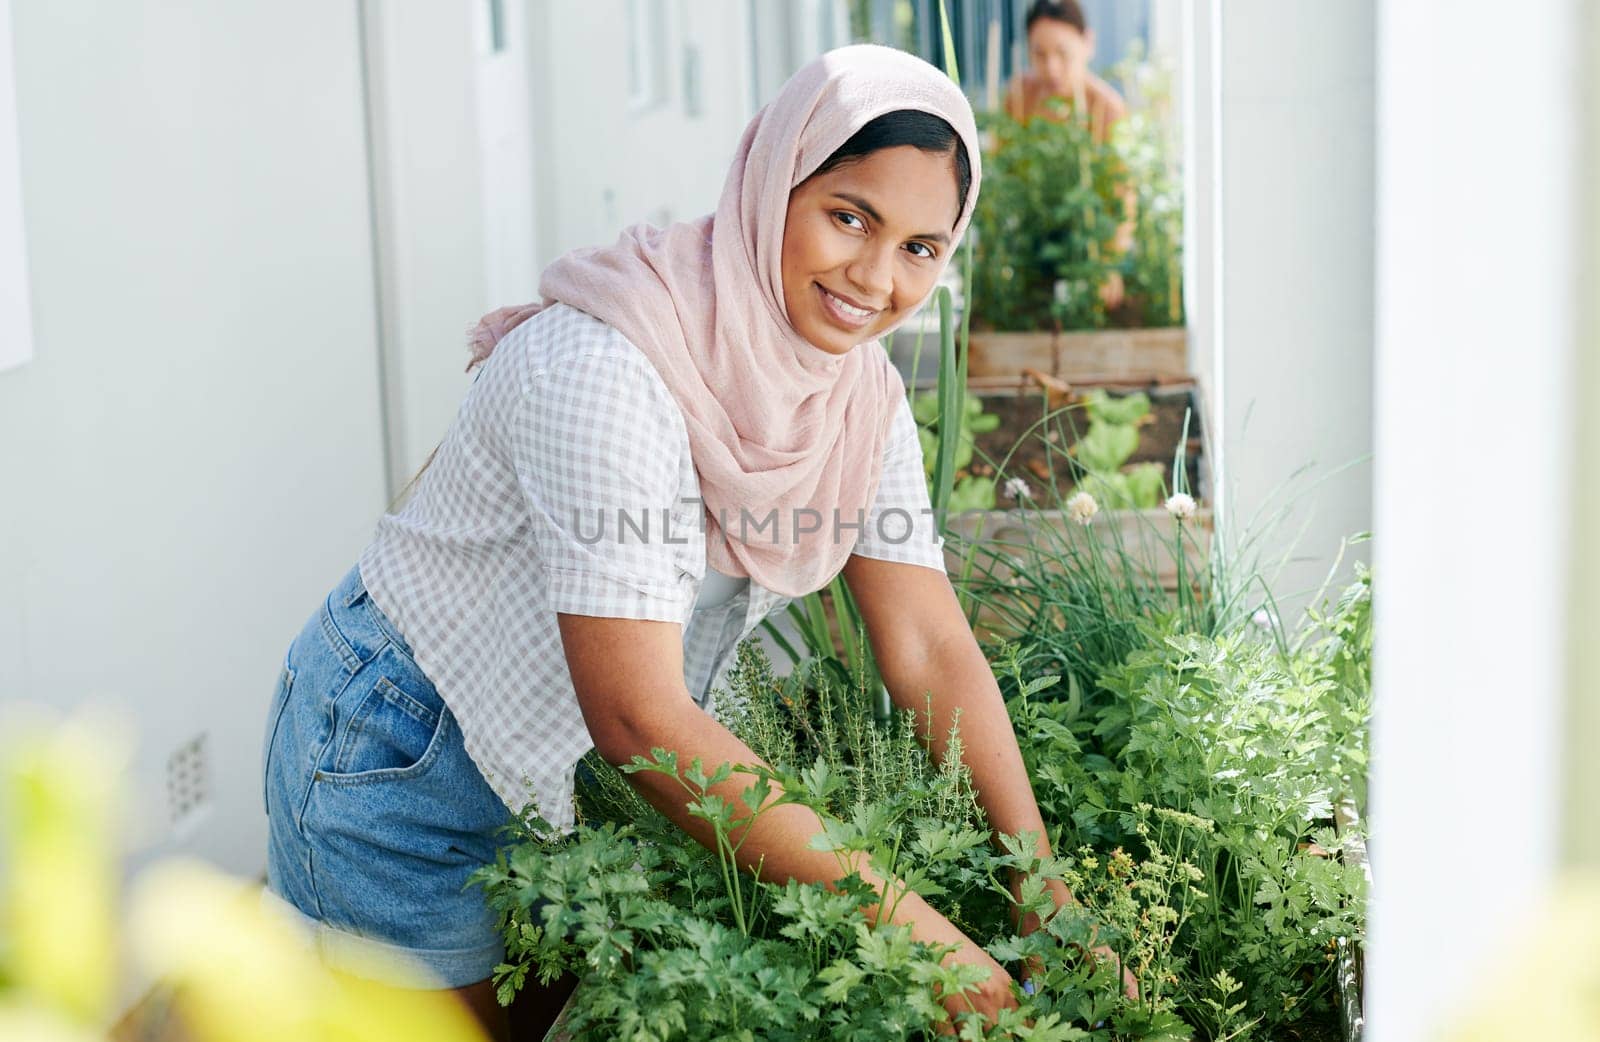 Muslim woman, plant and leaf with portrait for garden, sustainable development and faith or medicine. Gardener, flowers and texture outdoor with hijab for growth, islam culture and spiritual herbs.